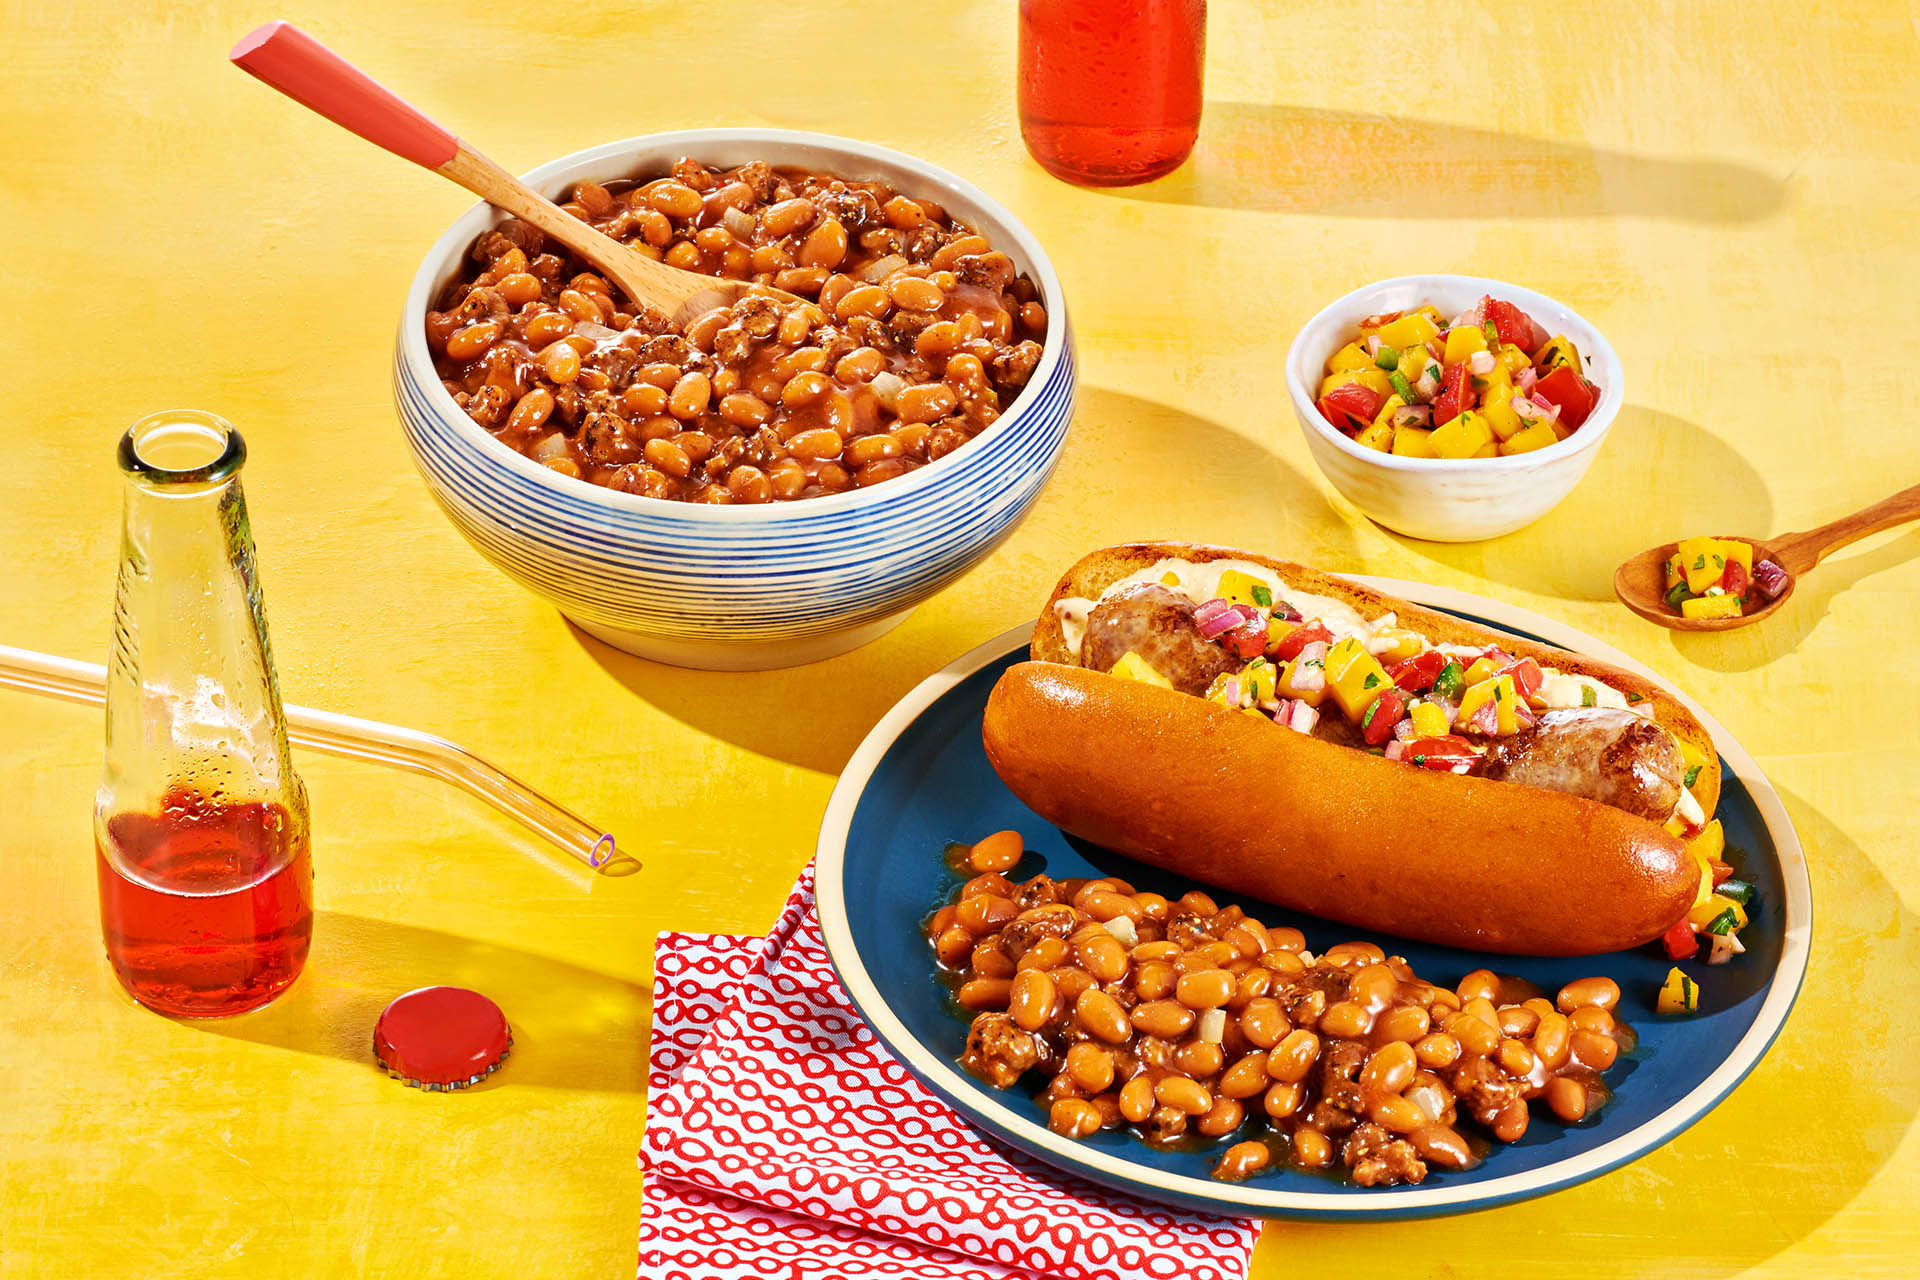 A grilled brat on a bun with a side of hamburger baked beans next to bowl of hamburger baked beans.